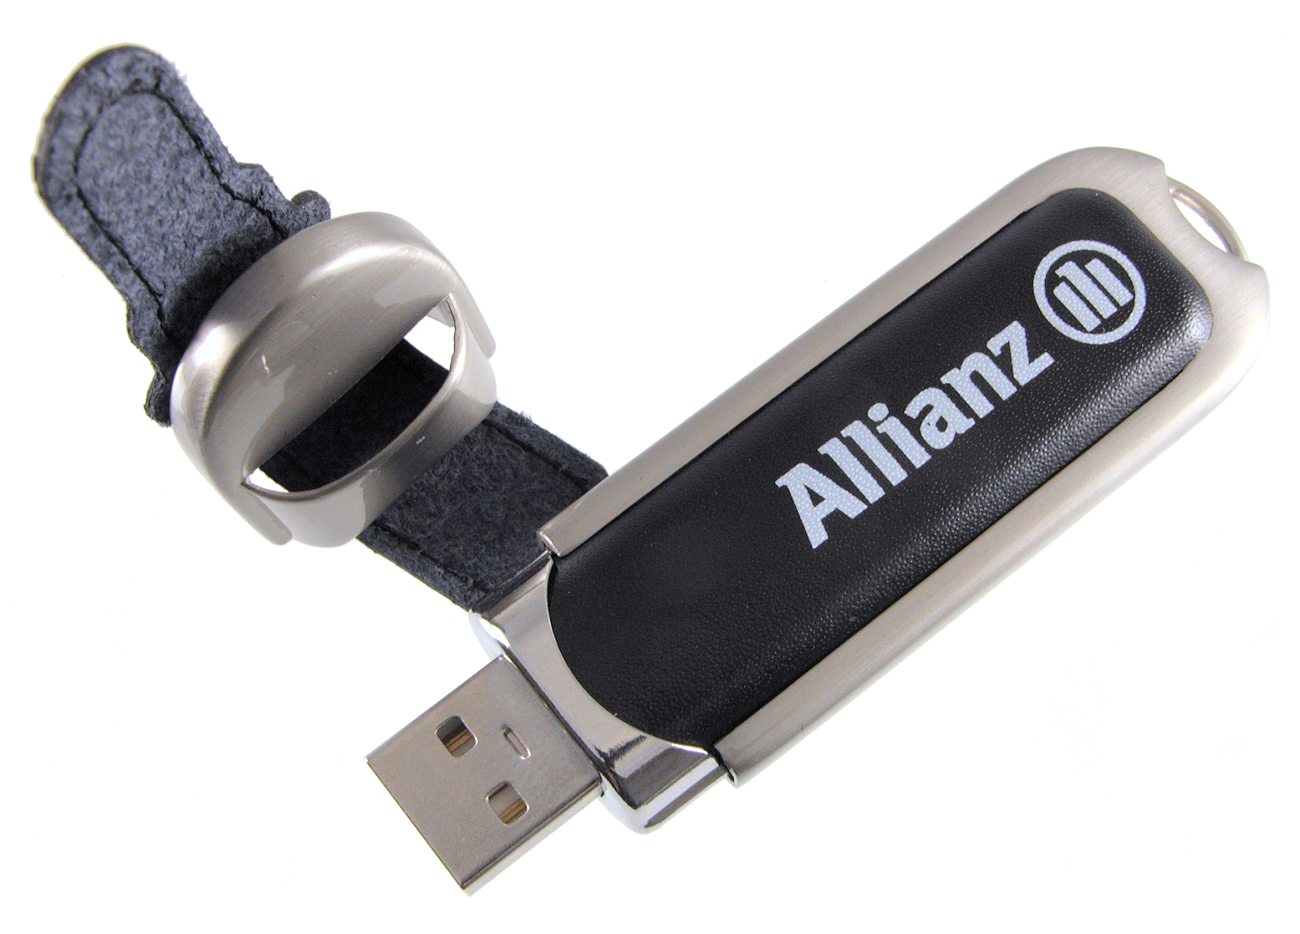 Black Leather And Metal Body Flash Drive Branded Alliance Cd289